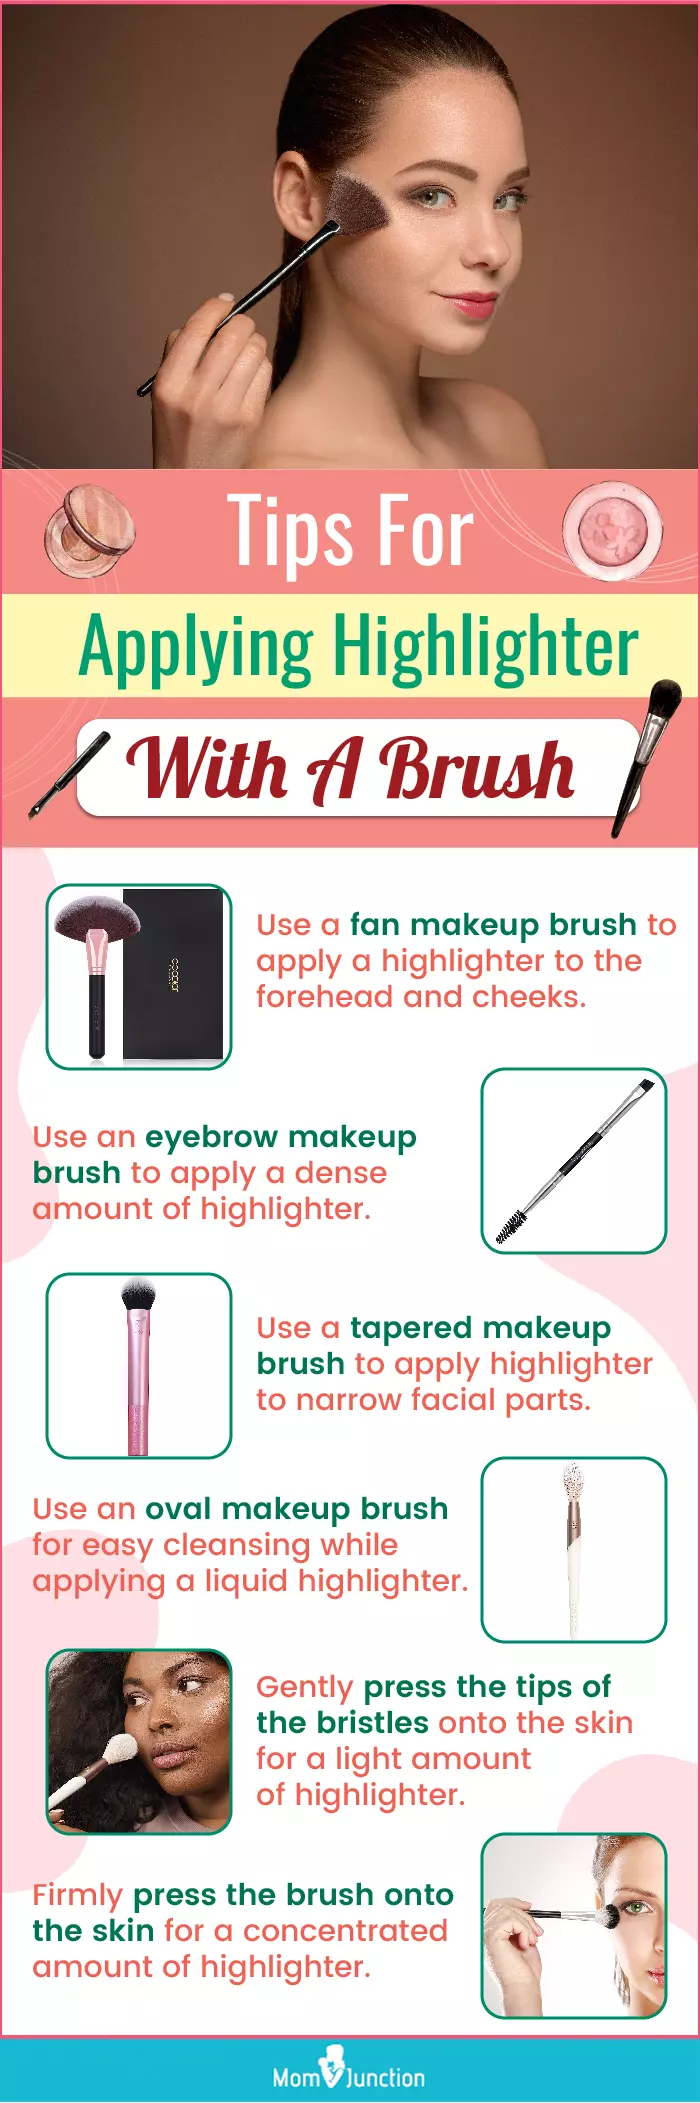 Tips For Applying Highlighter With A Brush (infographic)